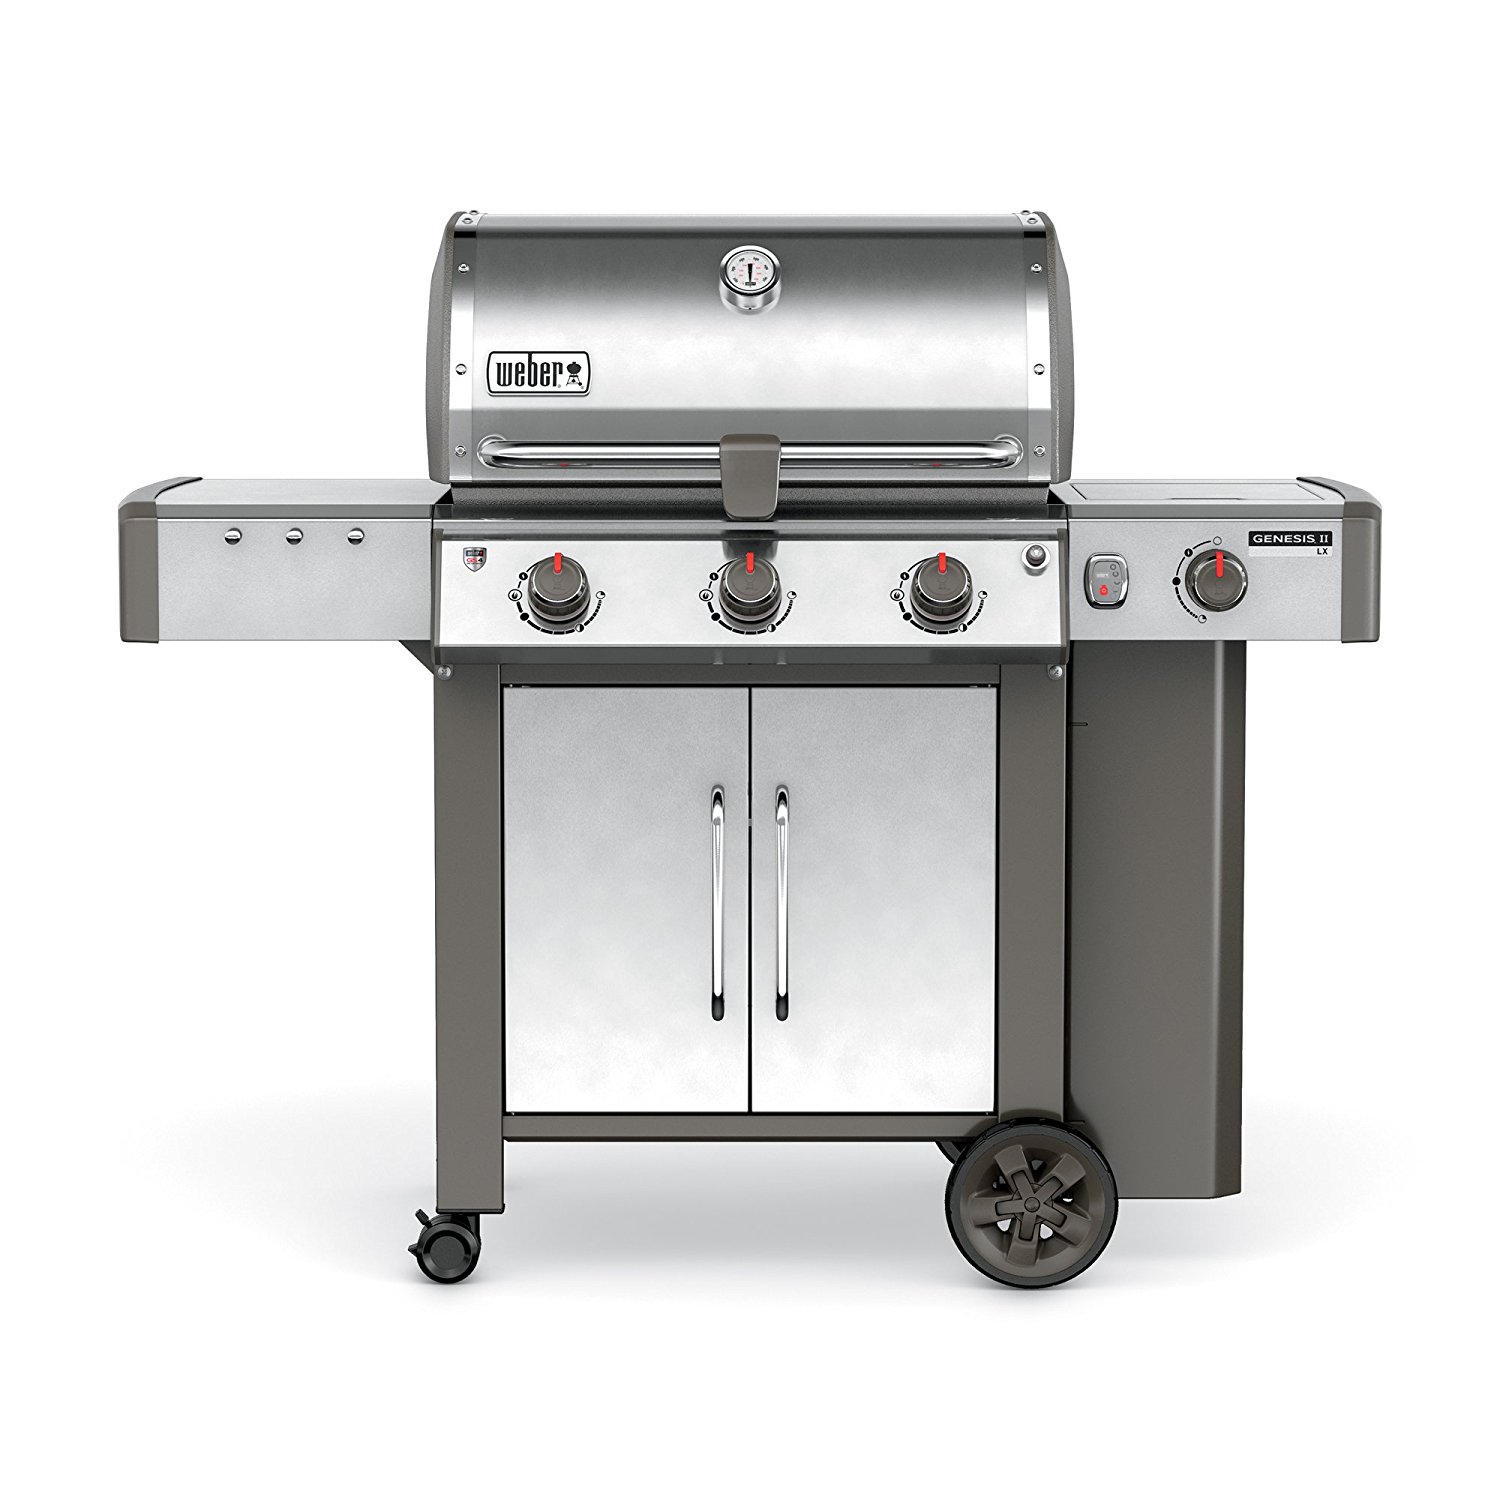 Weber 61004001 Genesis II LX S-340 Liquid Propane Grill, Stainless Weber All Stainless Steel Grill